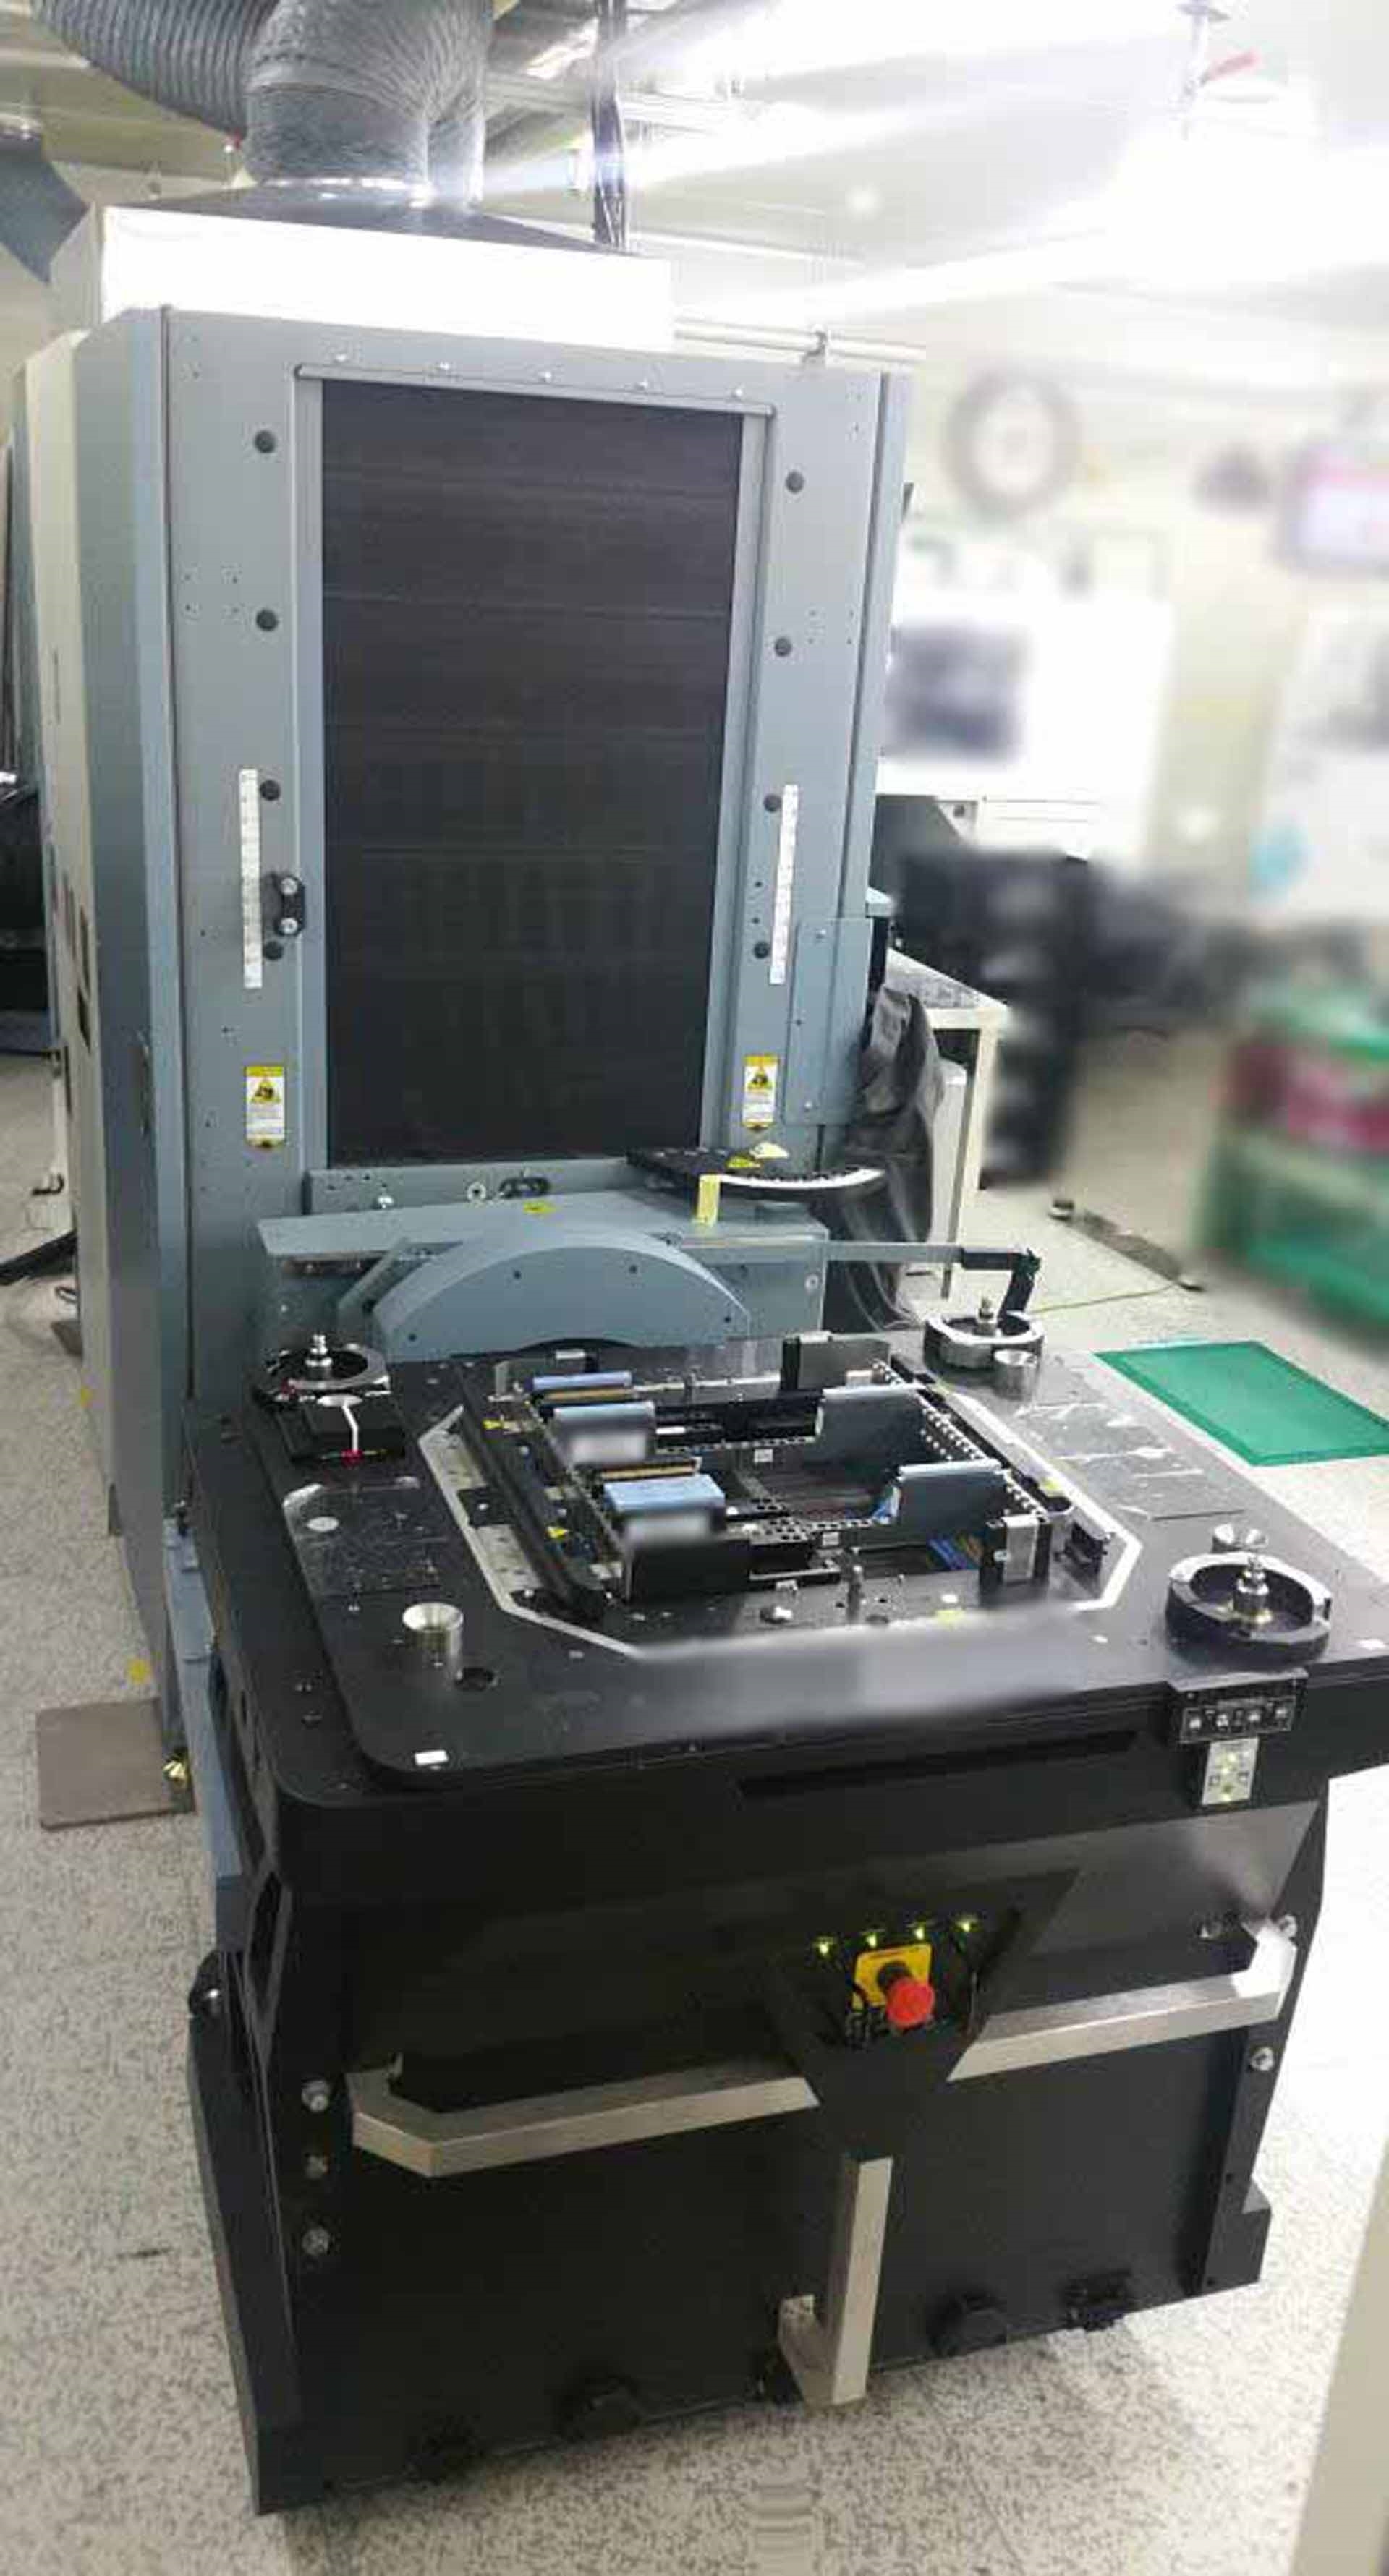 TERADYNE MicroFlex Final Testing Equipment used for sale price #9218613 >  buy from CAE